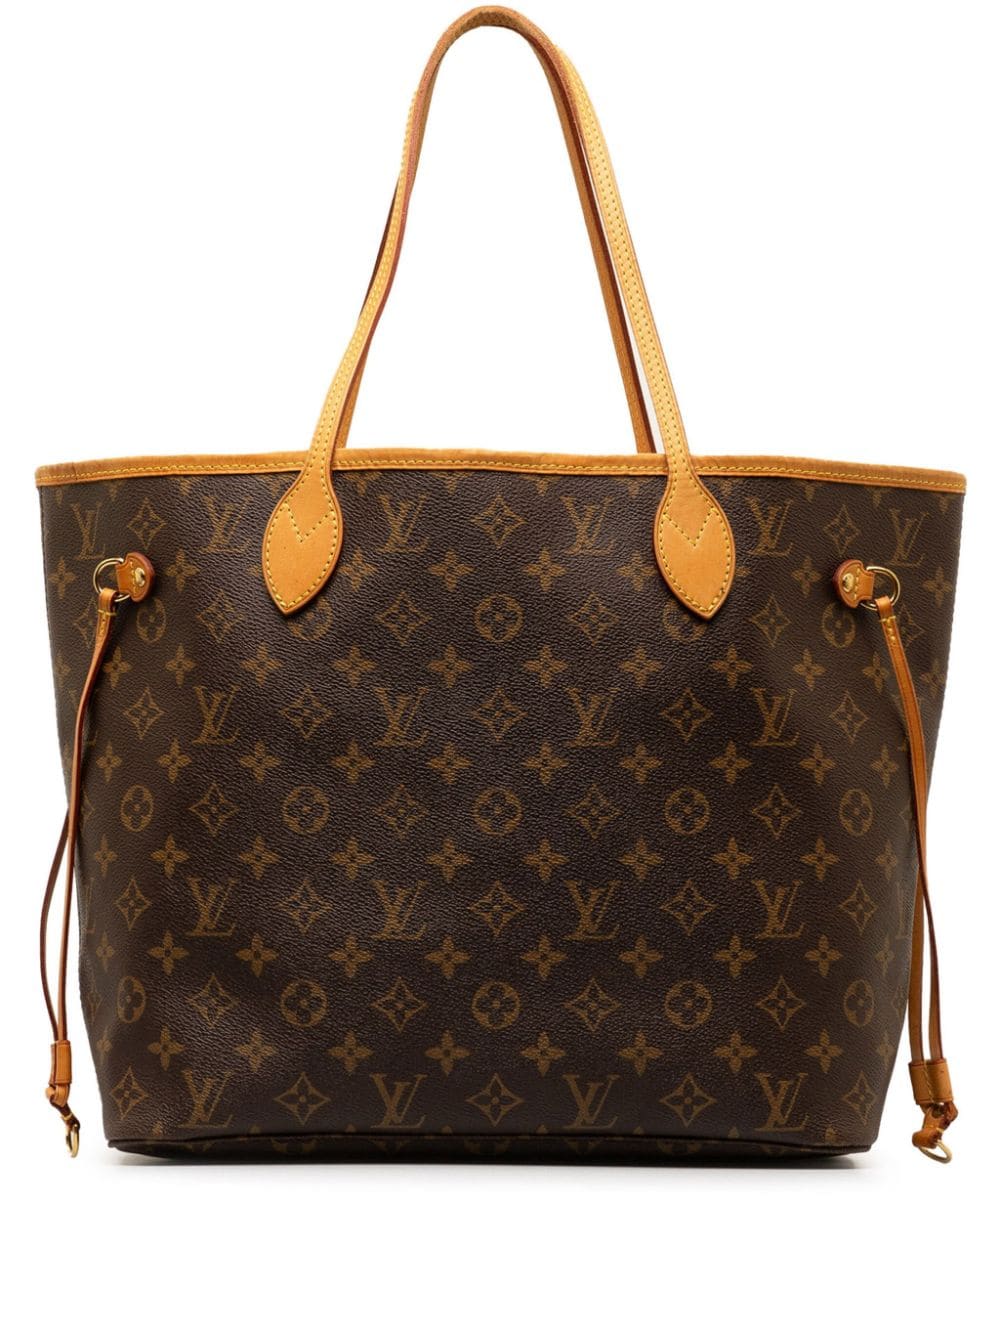 Pre-owned Louis Vuitton 2013 Neverfull Mm Tote Bag In Brown